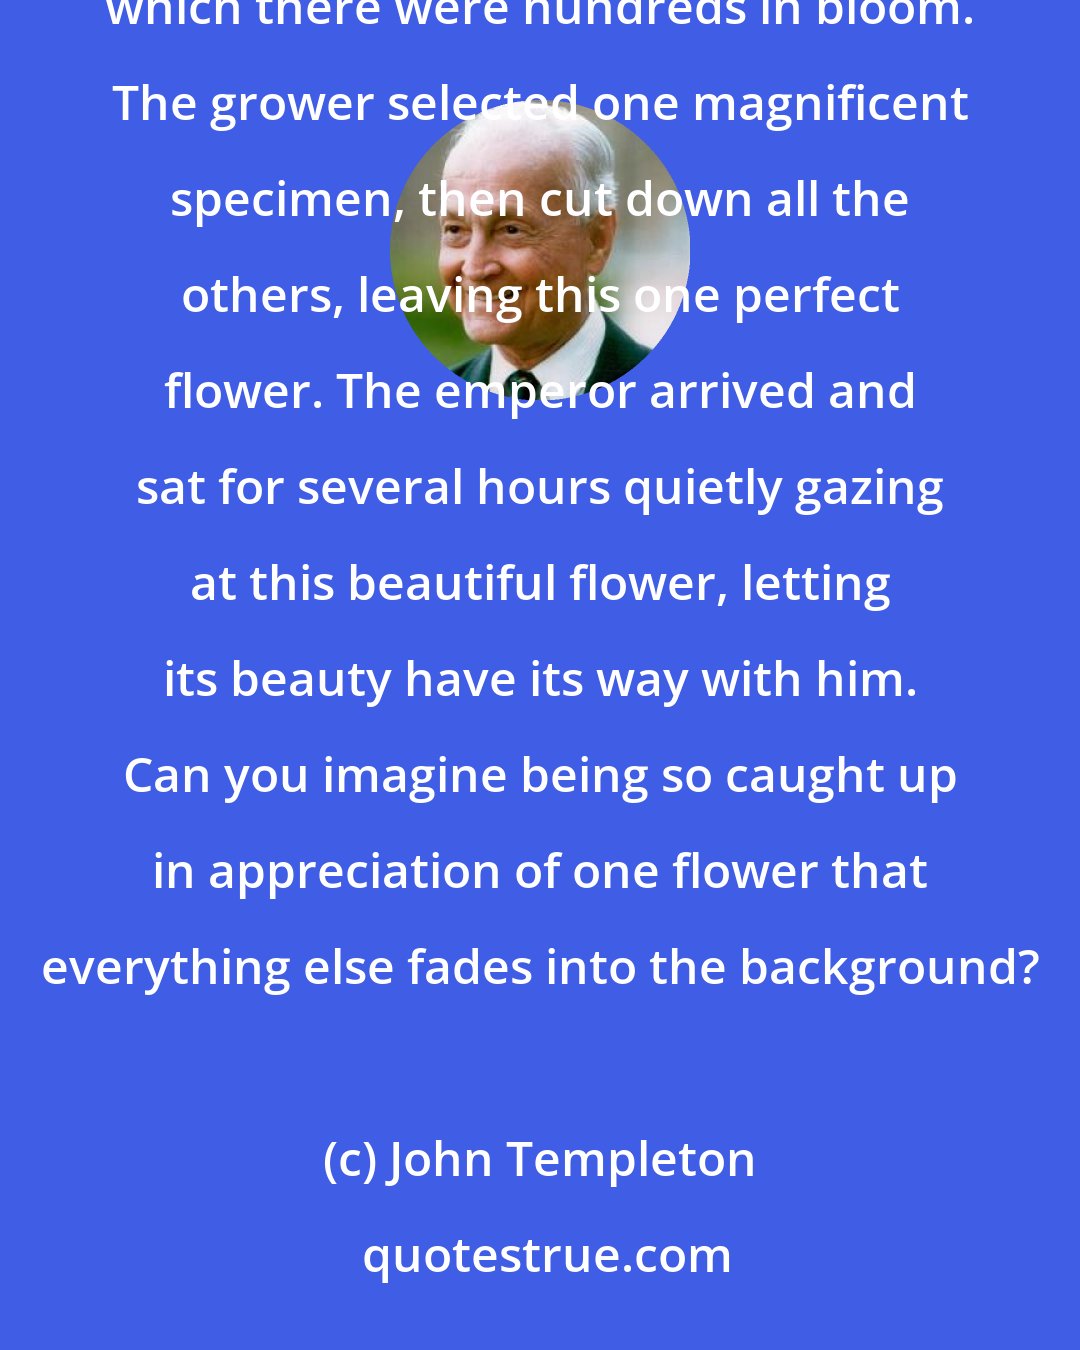 John Templeton: A grower of chrysanthemums awaited a visit from the emperor, who was coming to enjoy his blossoms, of which there were hundreds in bloom. The grower selected one magnificent specimen, then cut down all the others, leaving this one perfect flower. The emperor arrived and sat for several hours quietly gazing at this beautiful flower, letting its beauty have its way with him. Can you imagine being so caught up in appreciation of one flower that everything else fades into the background?